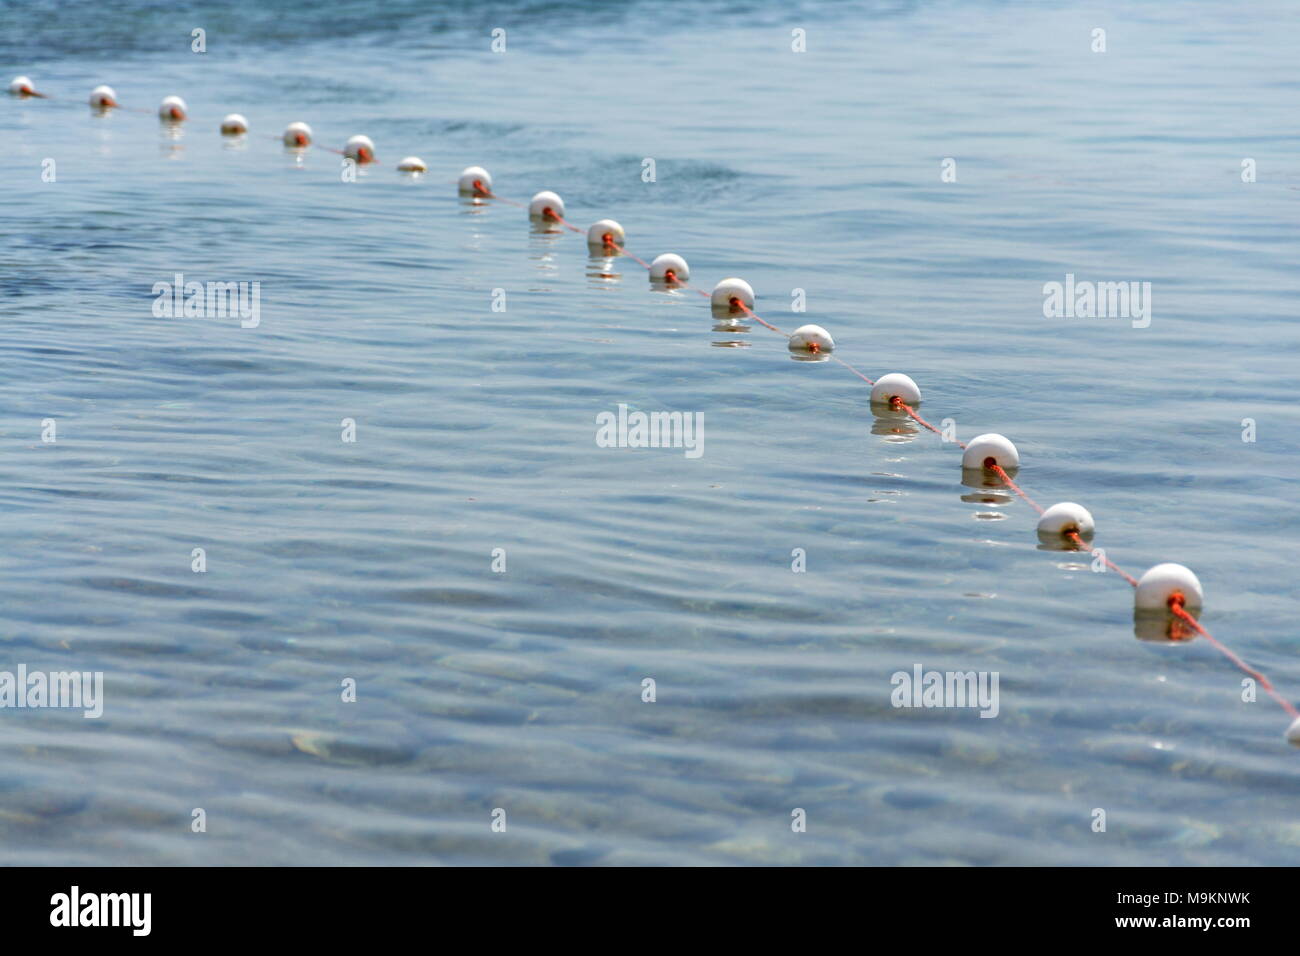 Buoys on fish net floating on surface of water Stock Photo - Alamy